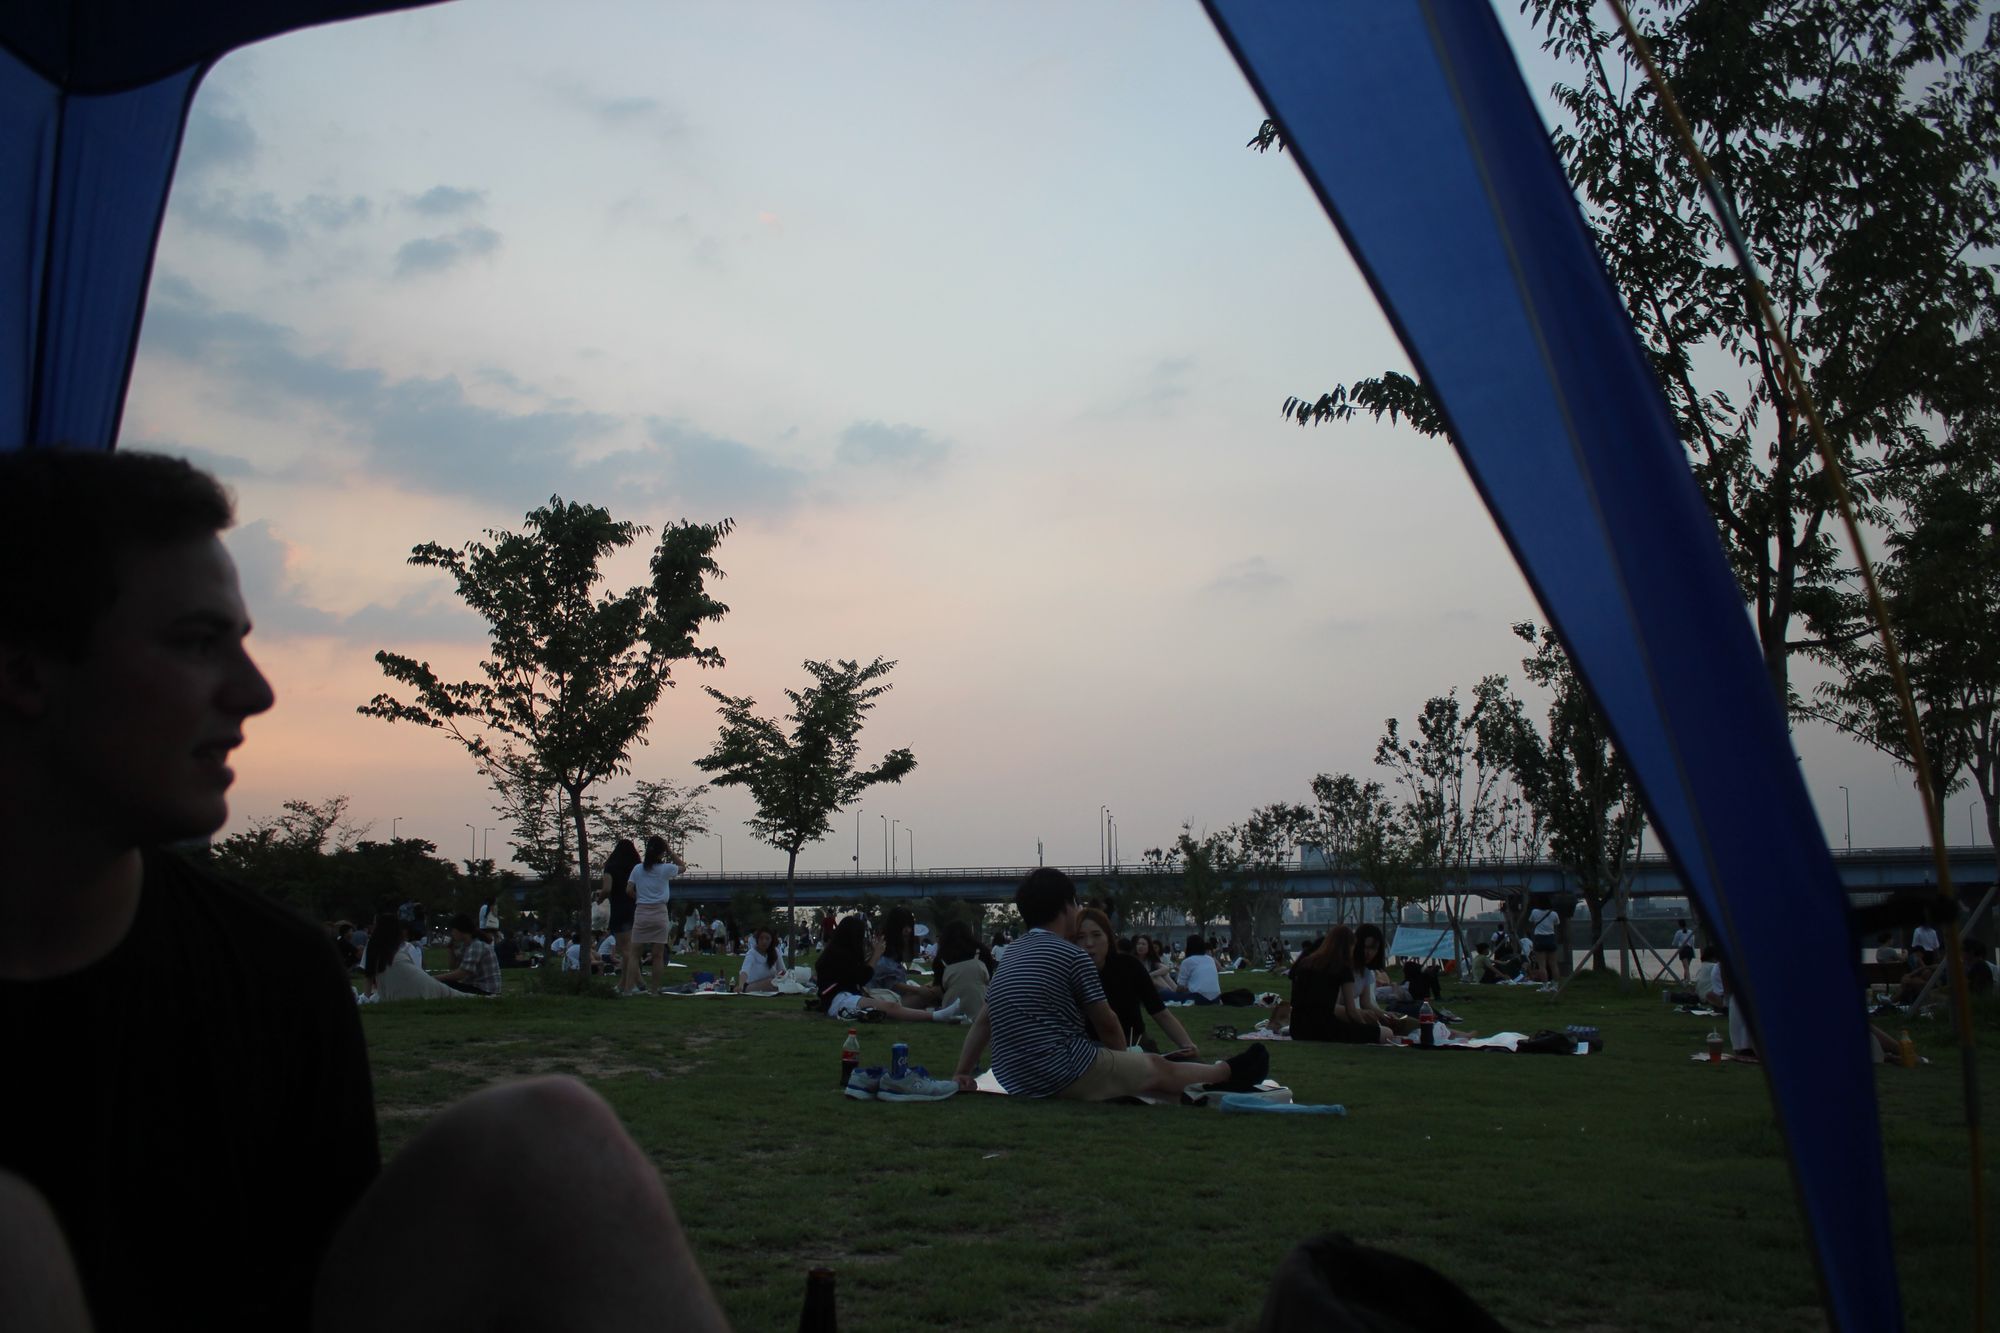 One night at the Han-River